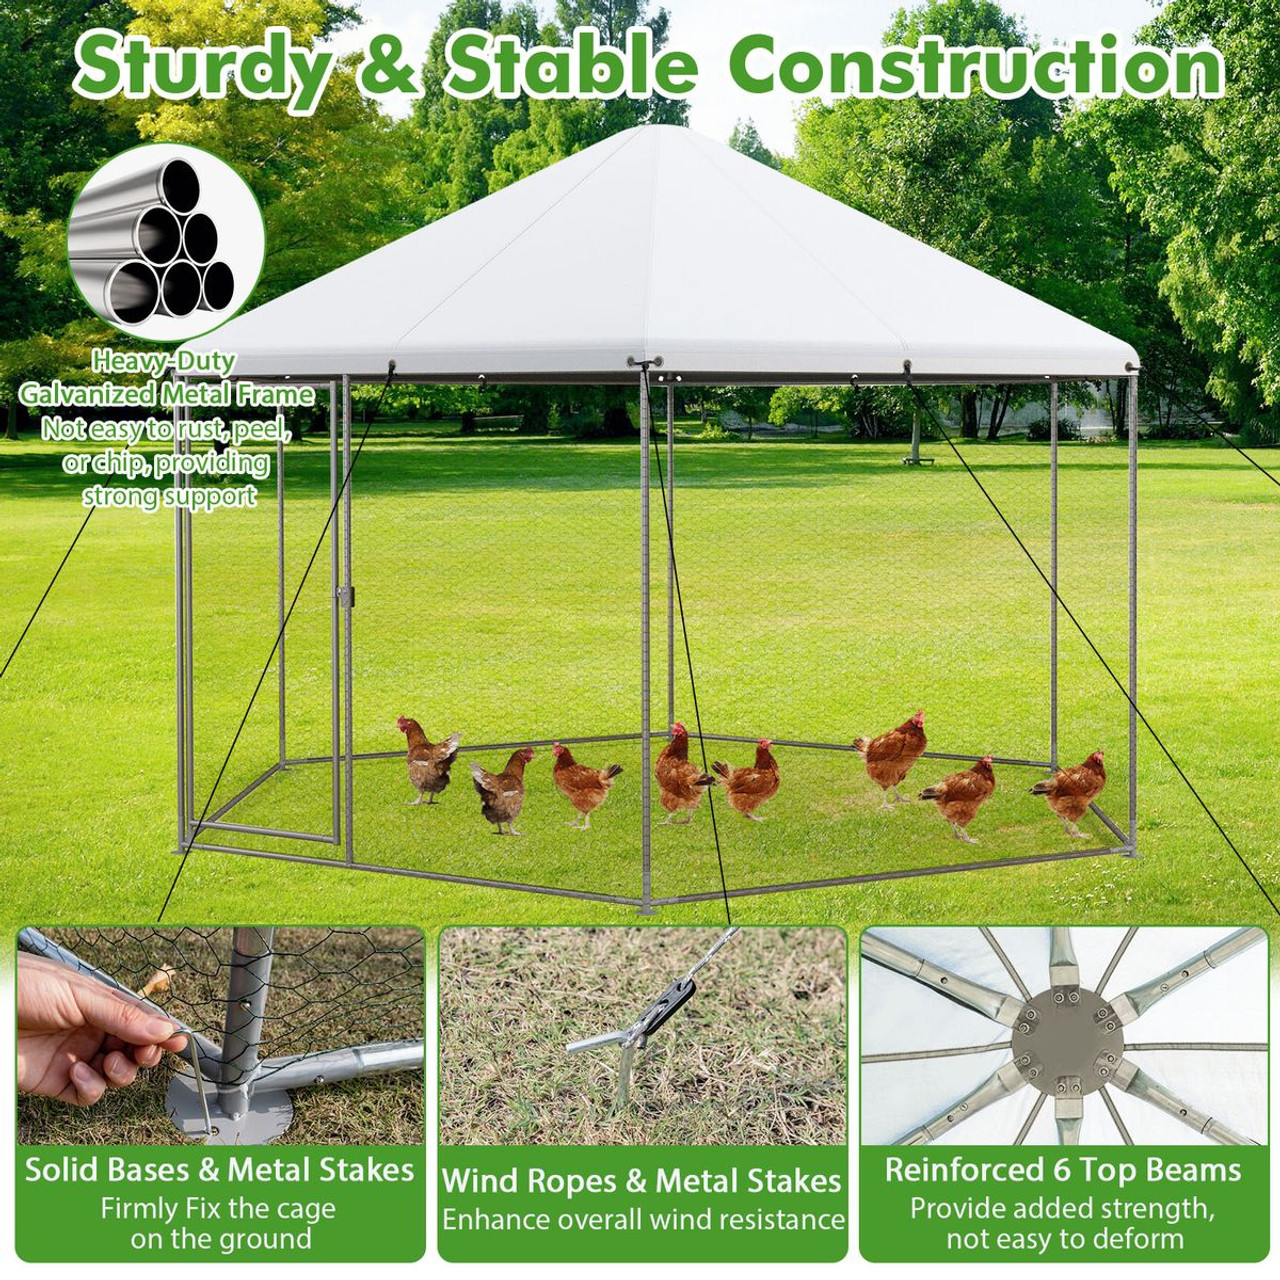 Large Walk-in Heavy-Duty Chicken Coop product image